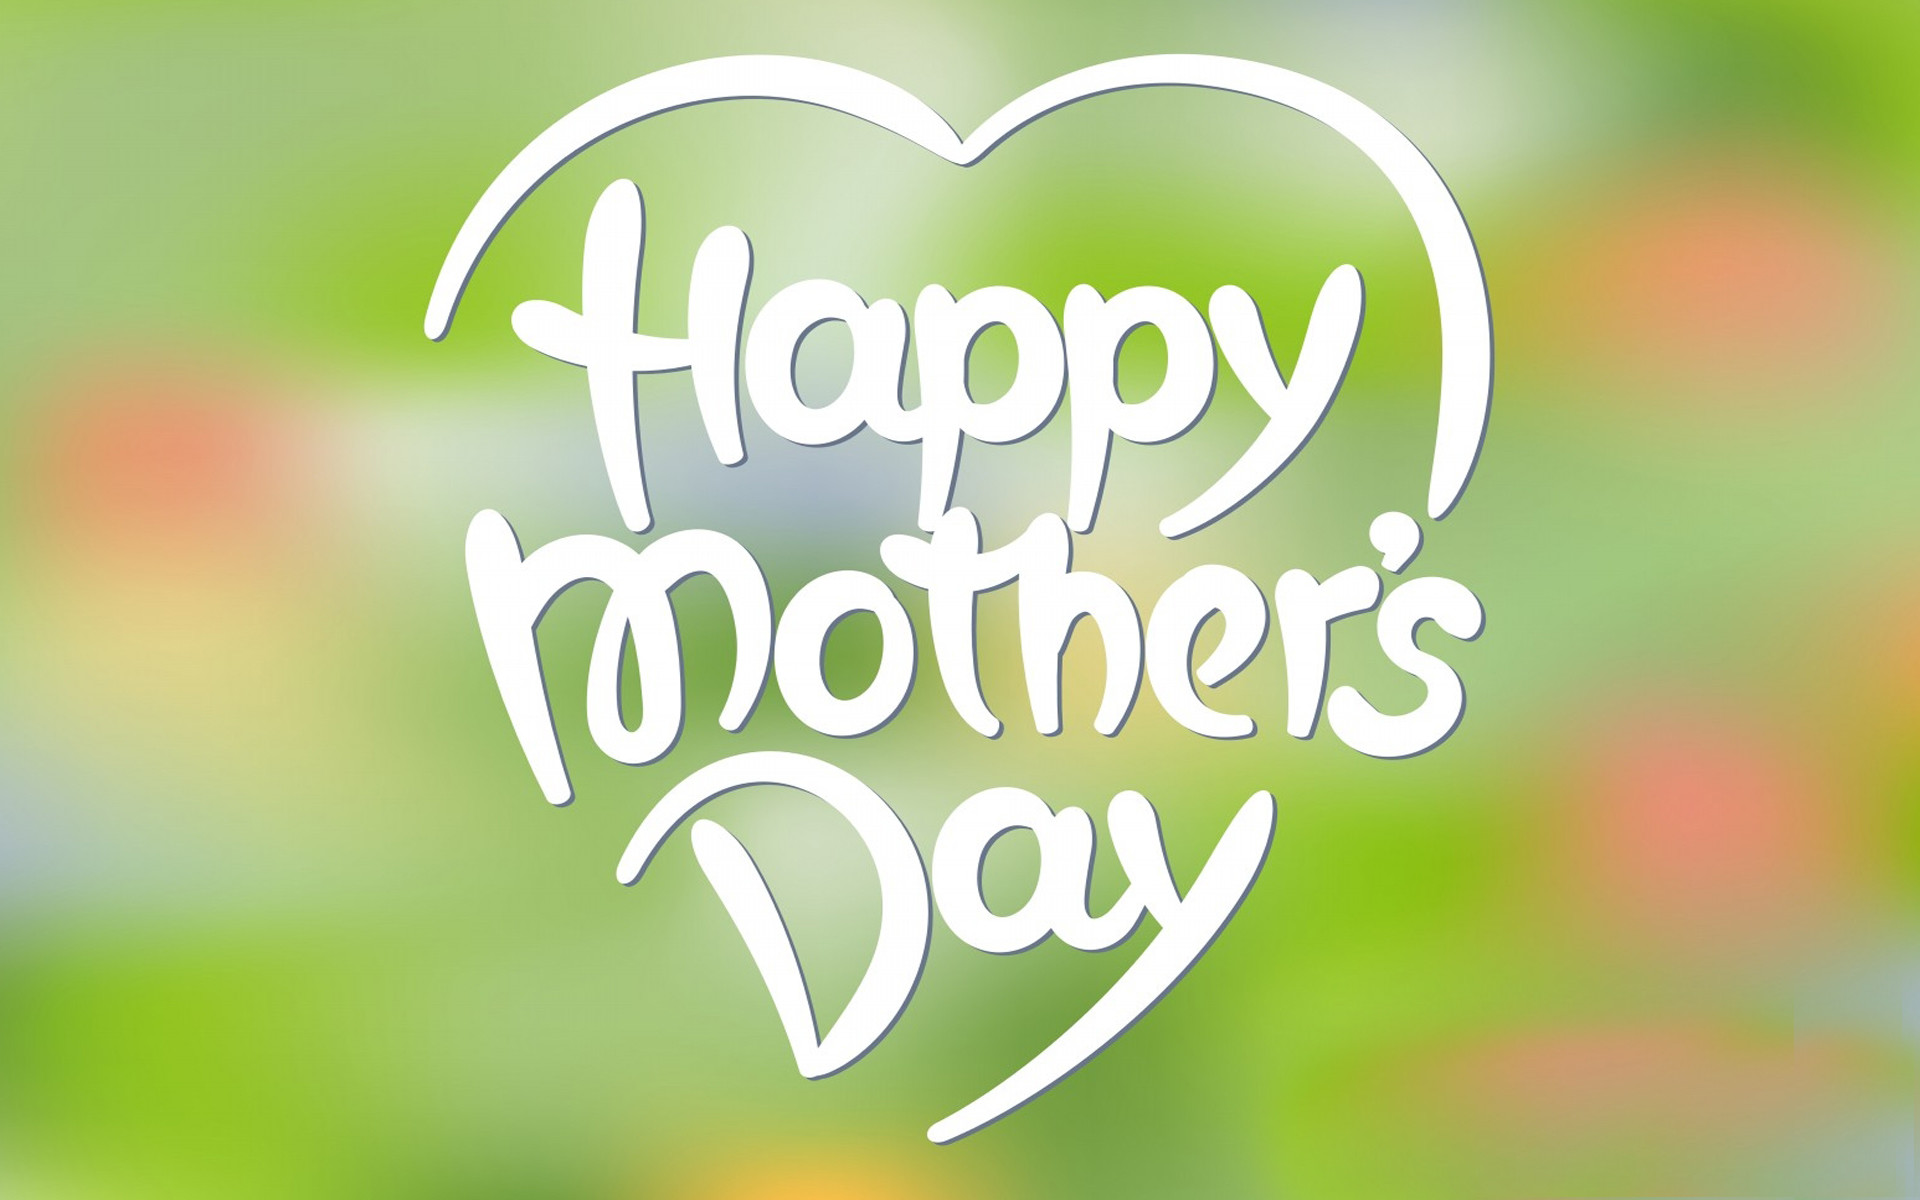 I Love You Mom Wallpaper Free Download - Happy Mothers Day Hd - HD Wallpaper 